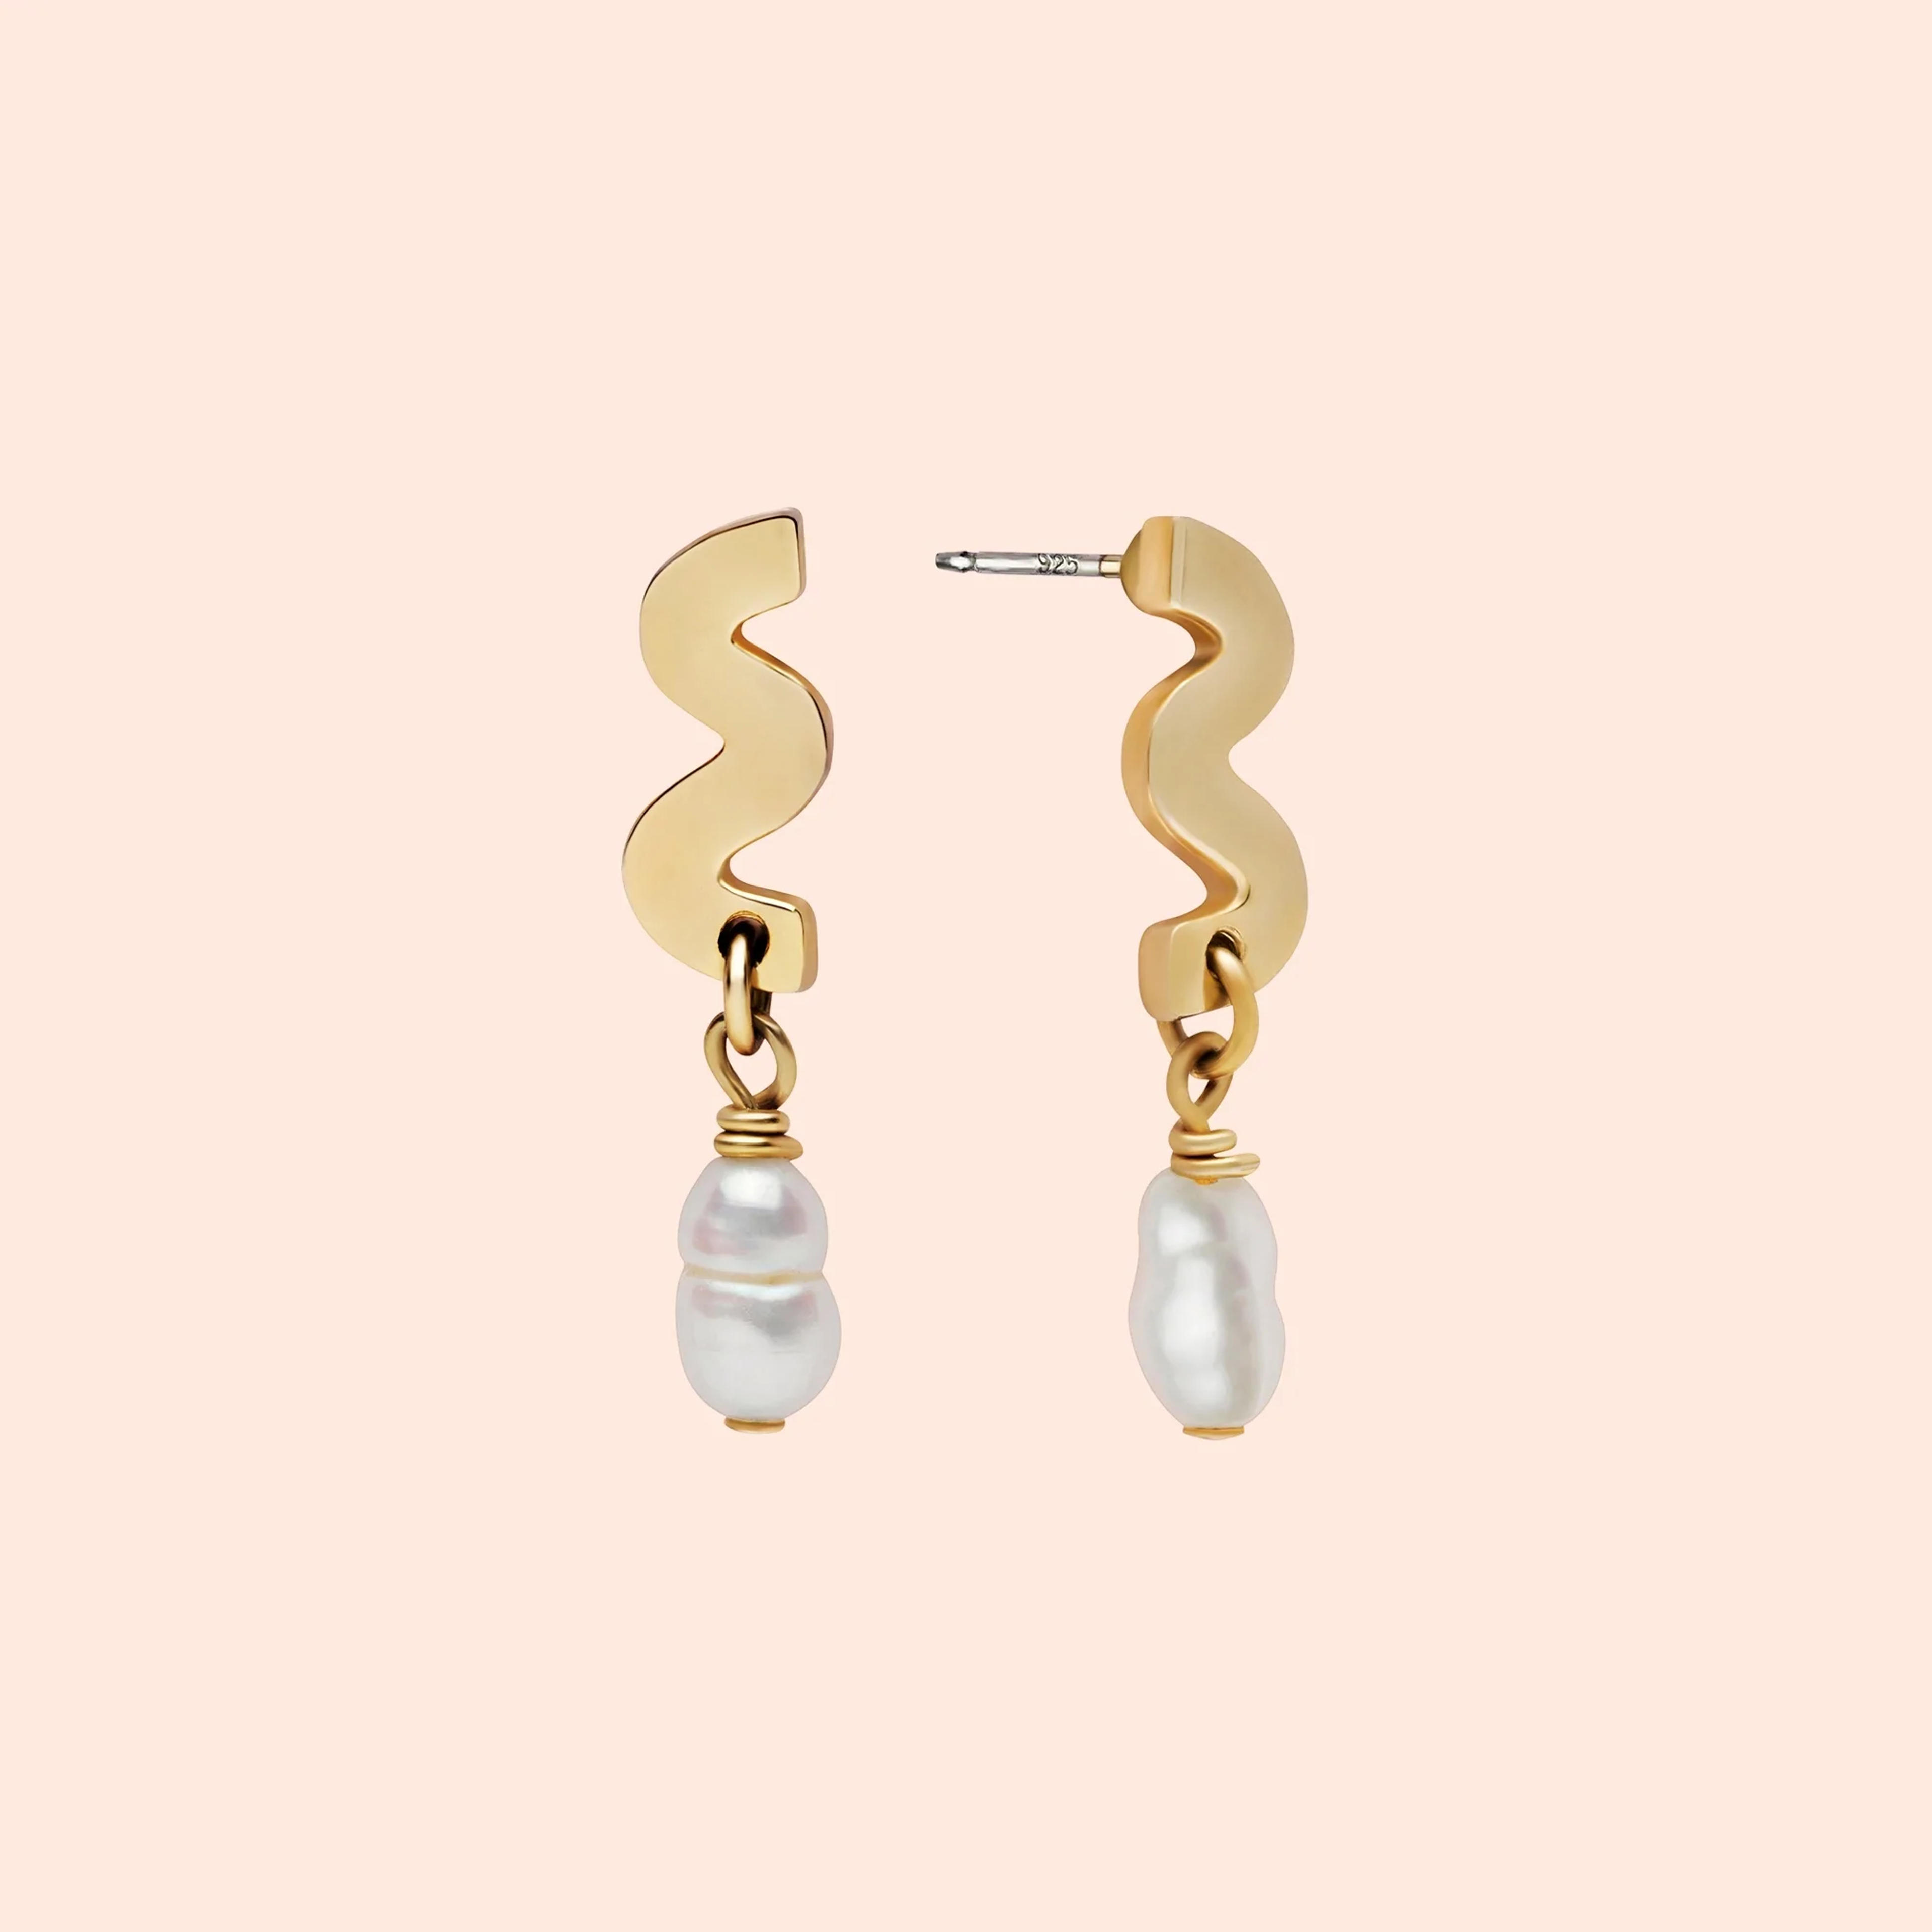 Tower 28 x Yam Pearl Drop Earrings - One Size